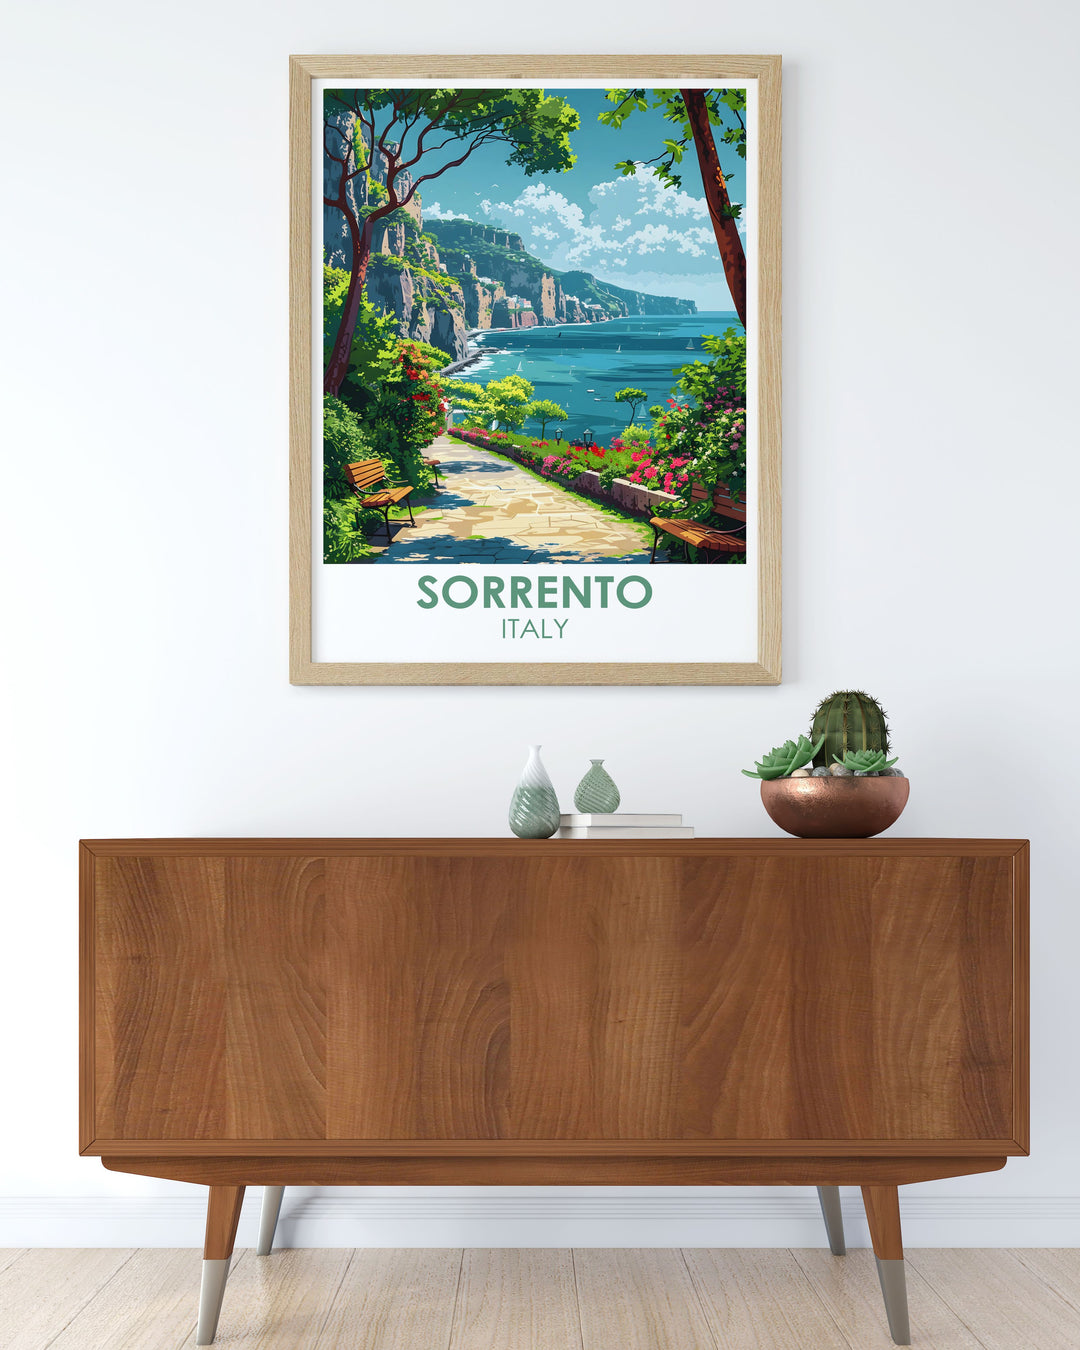 Italy travel print showcasing the tranquility of Villa Comunale Park in Sorrento with vibrant greenery and picturesque pathways. Ideal for creating an inviting and artistic atmosphere in your living space this Sorrento art print is a stunning addition to any decor.